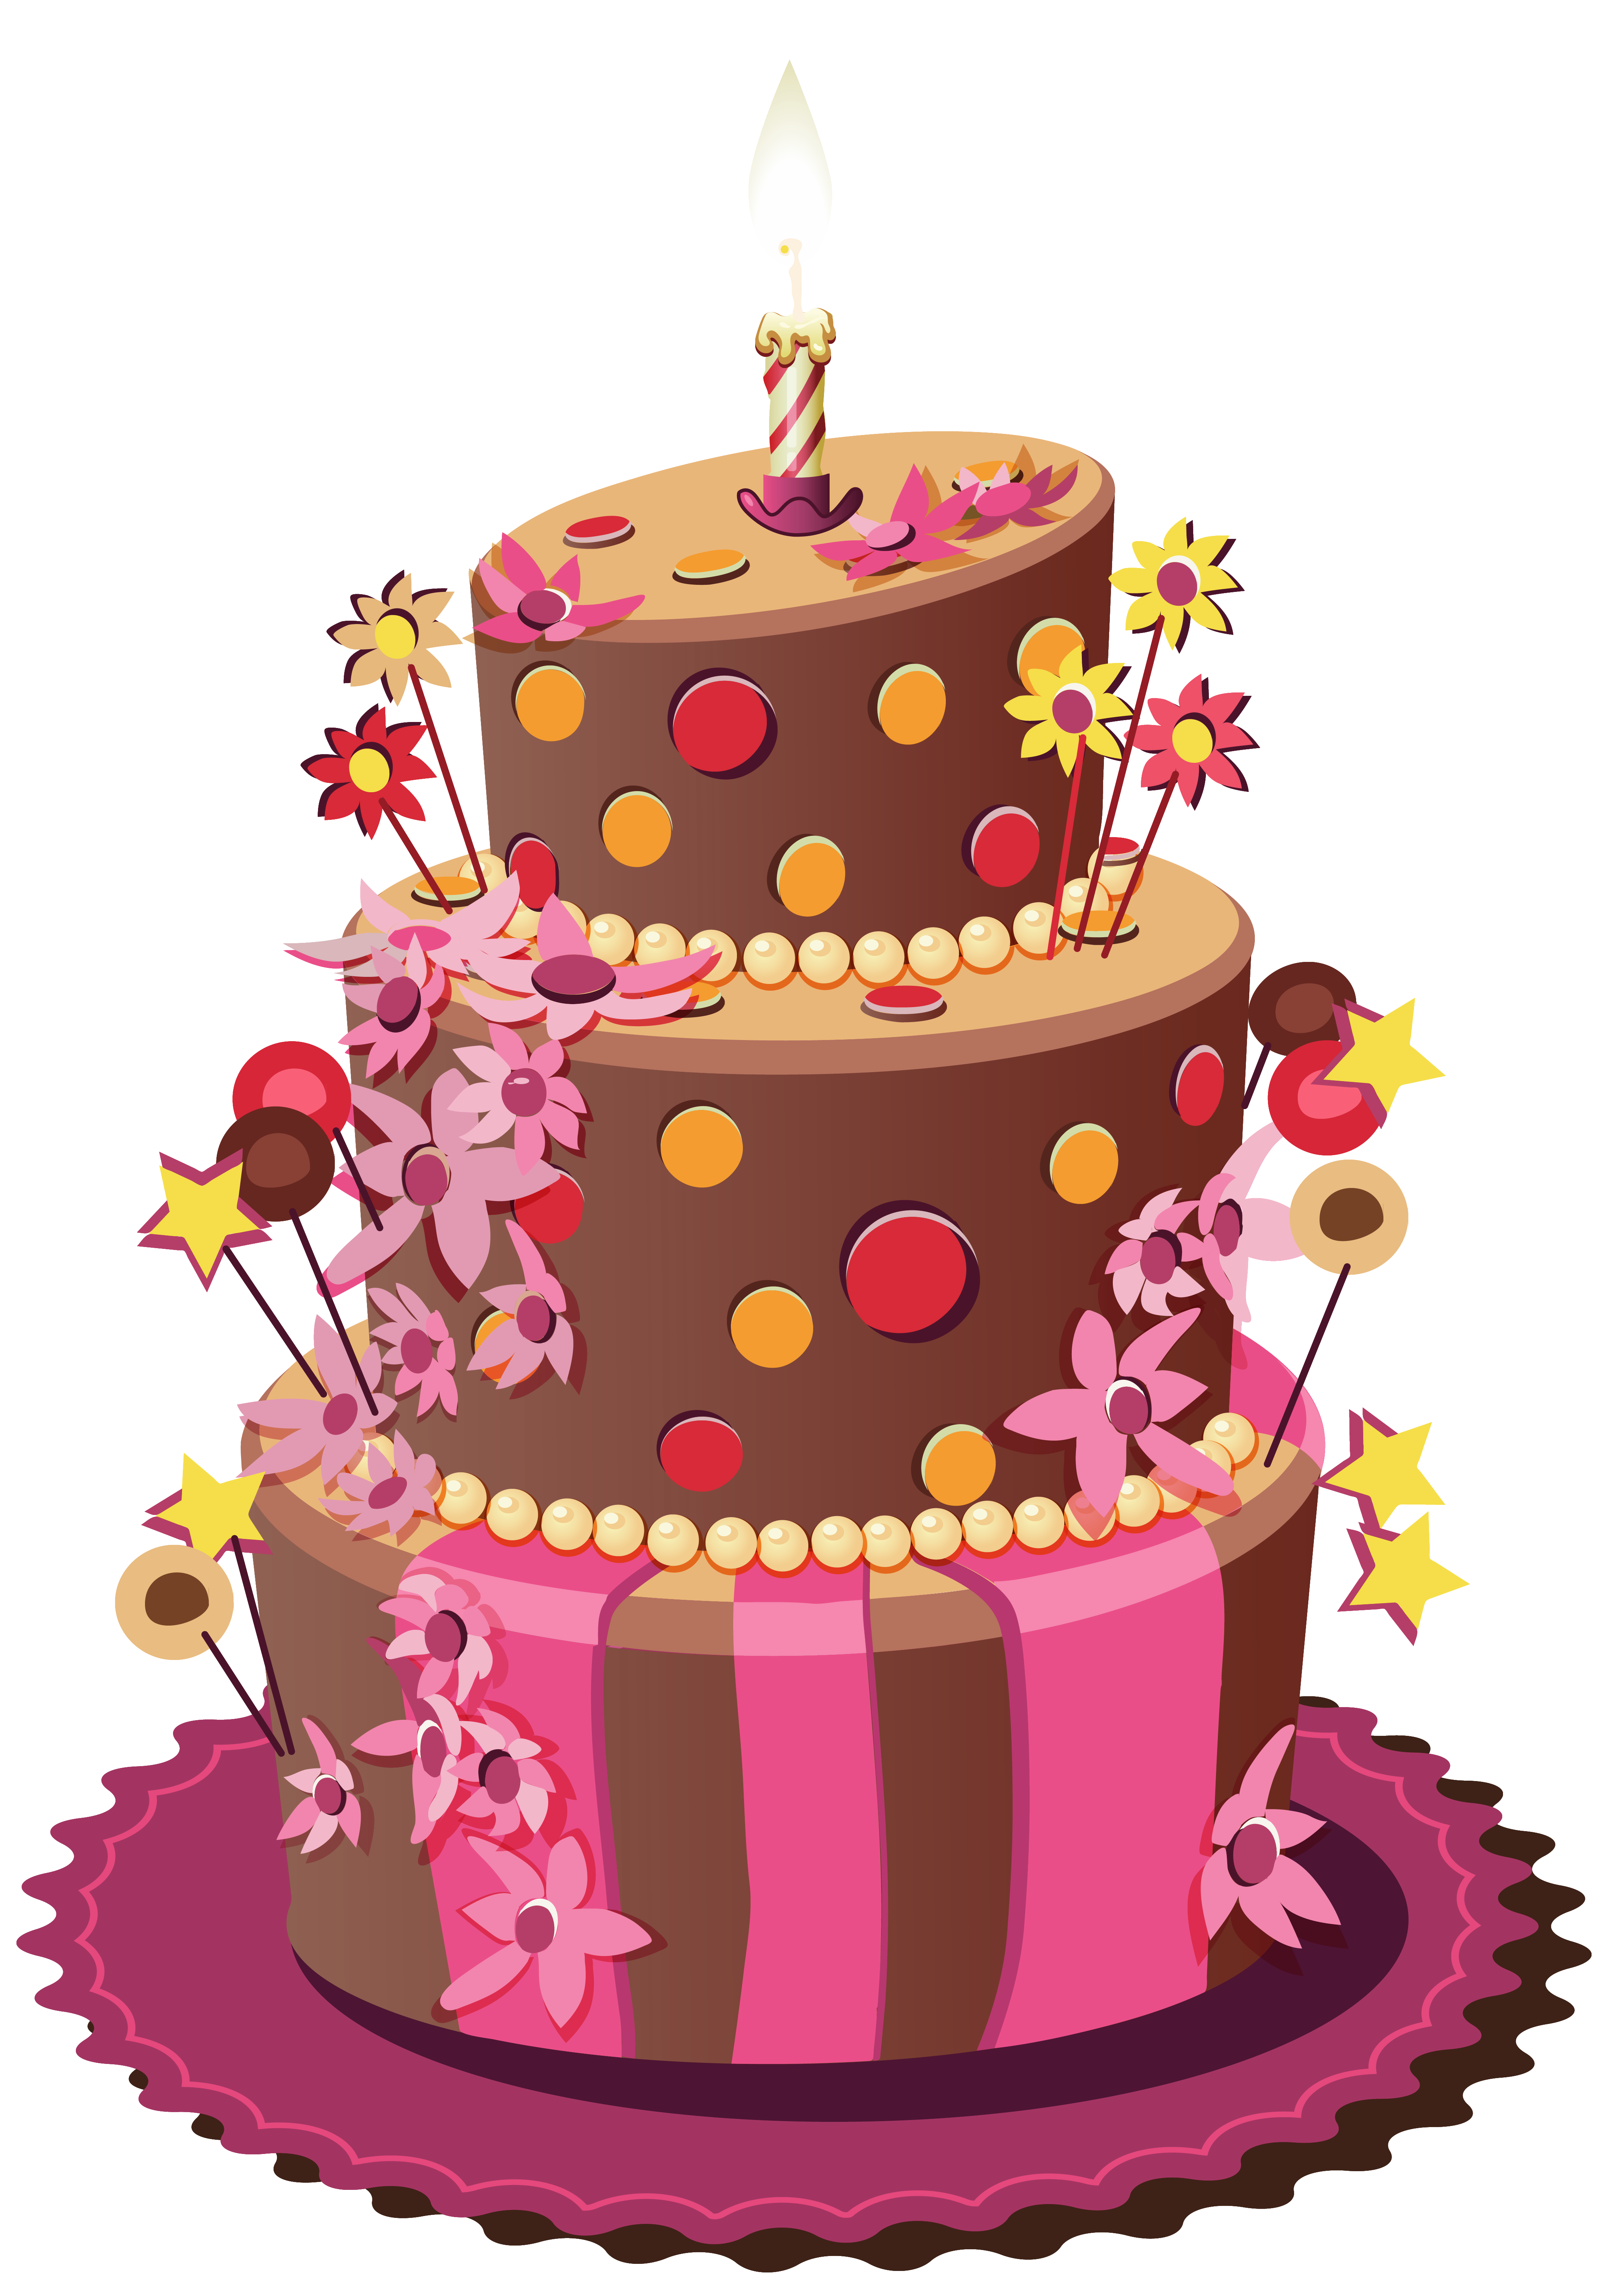 Birthday Cake PNG Clipart Image | Gallery Yopriceville ...